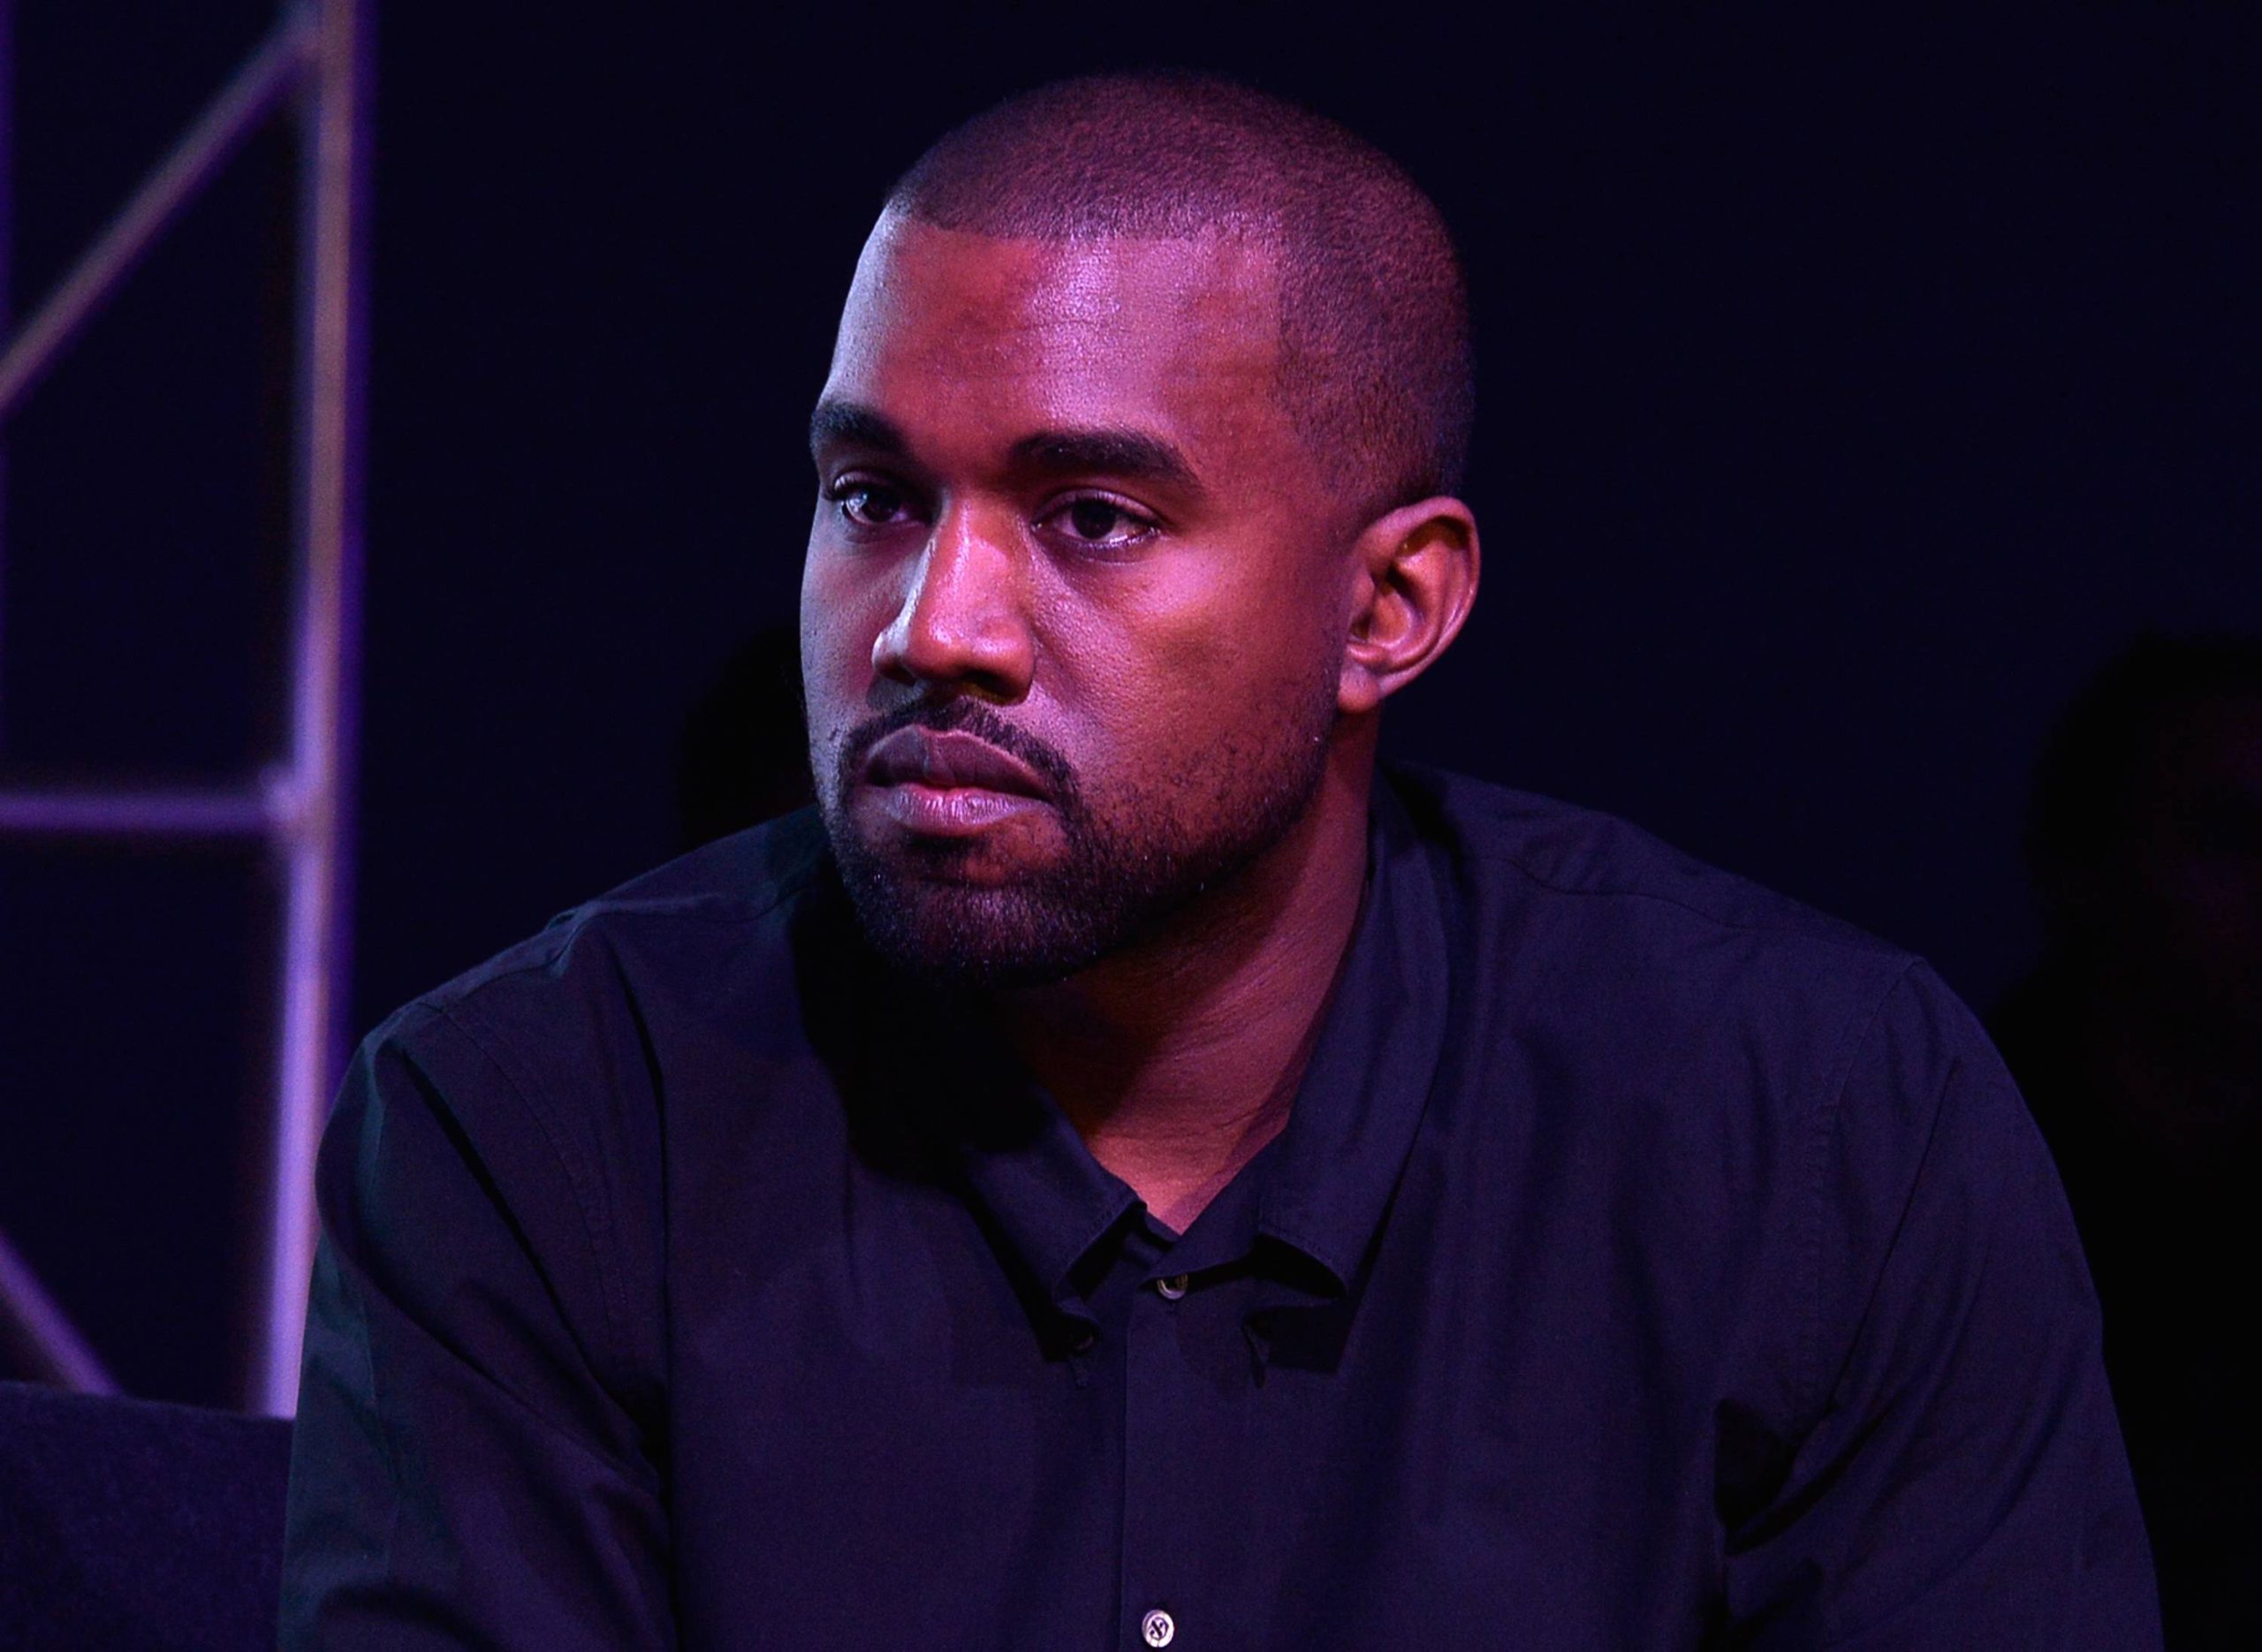 Kanye West's Album Teaser: Why Fans Are Buzzing Over the Rapper's Animated Reaction